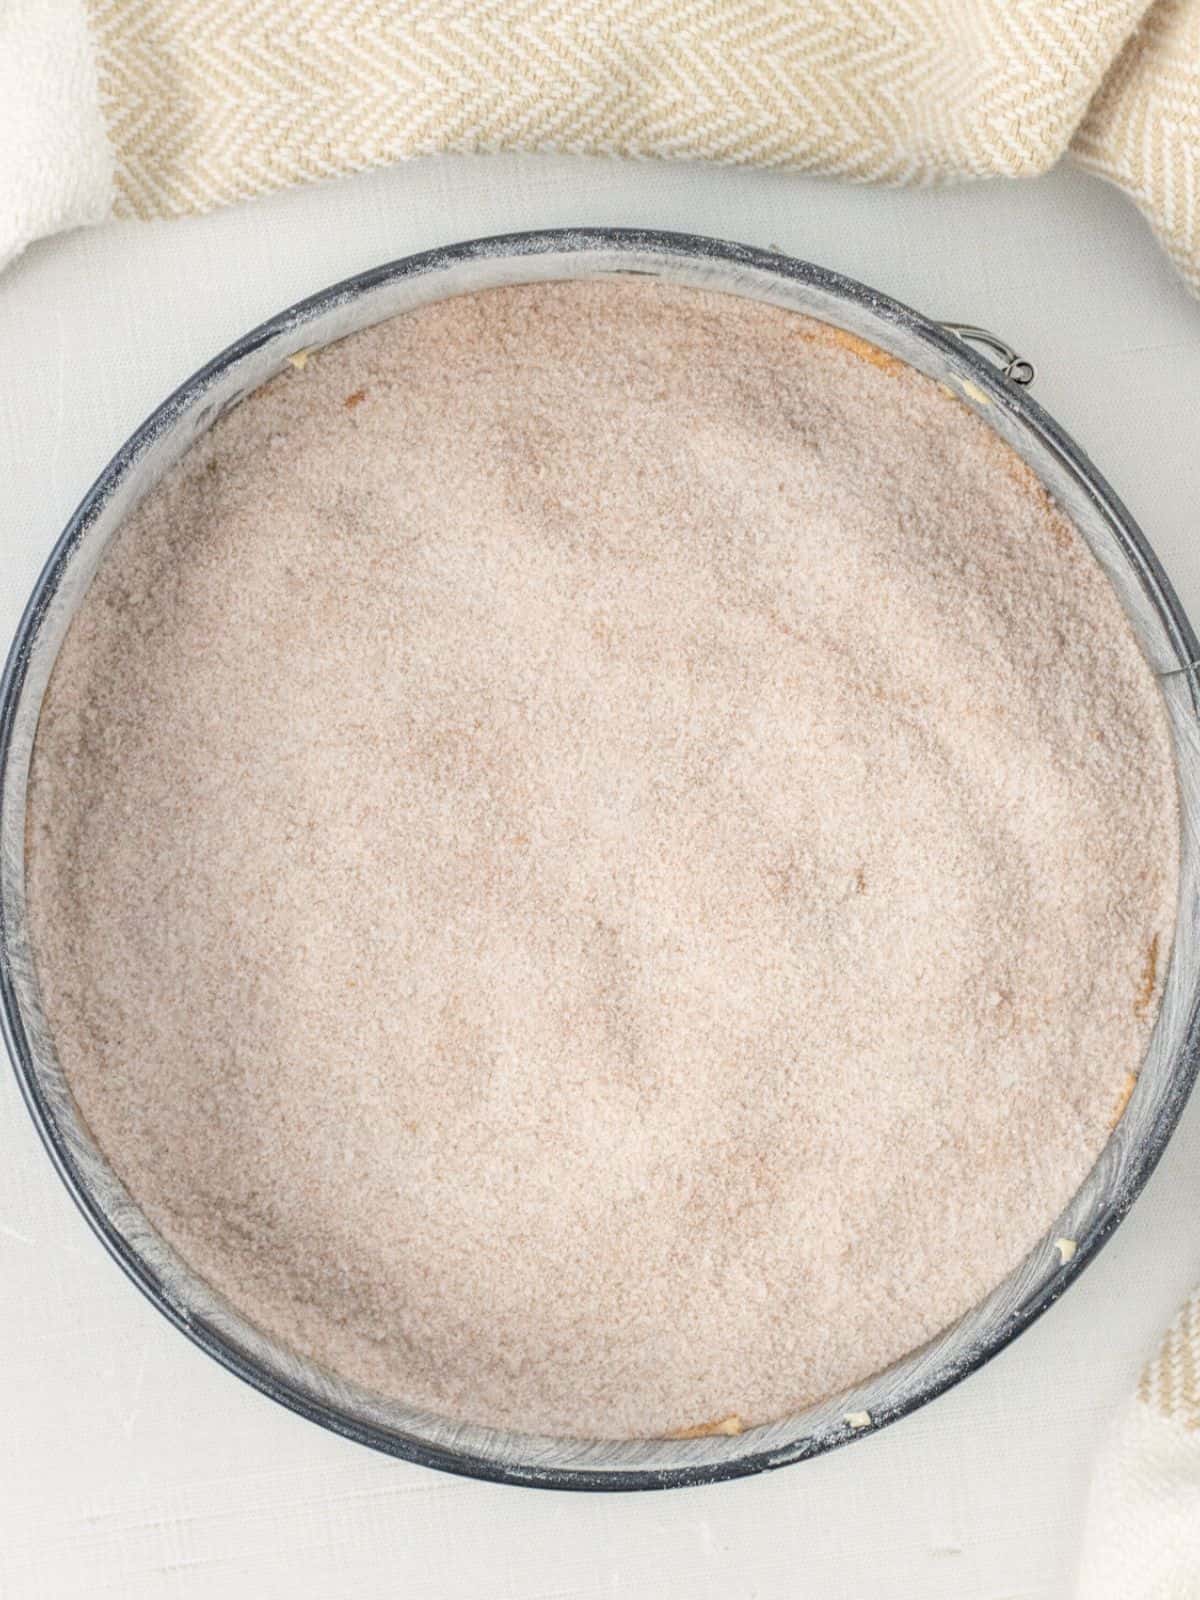 Cinnamon sugar layer added to cake in a springform pan.